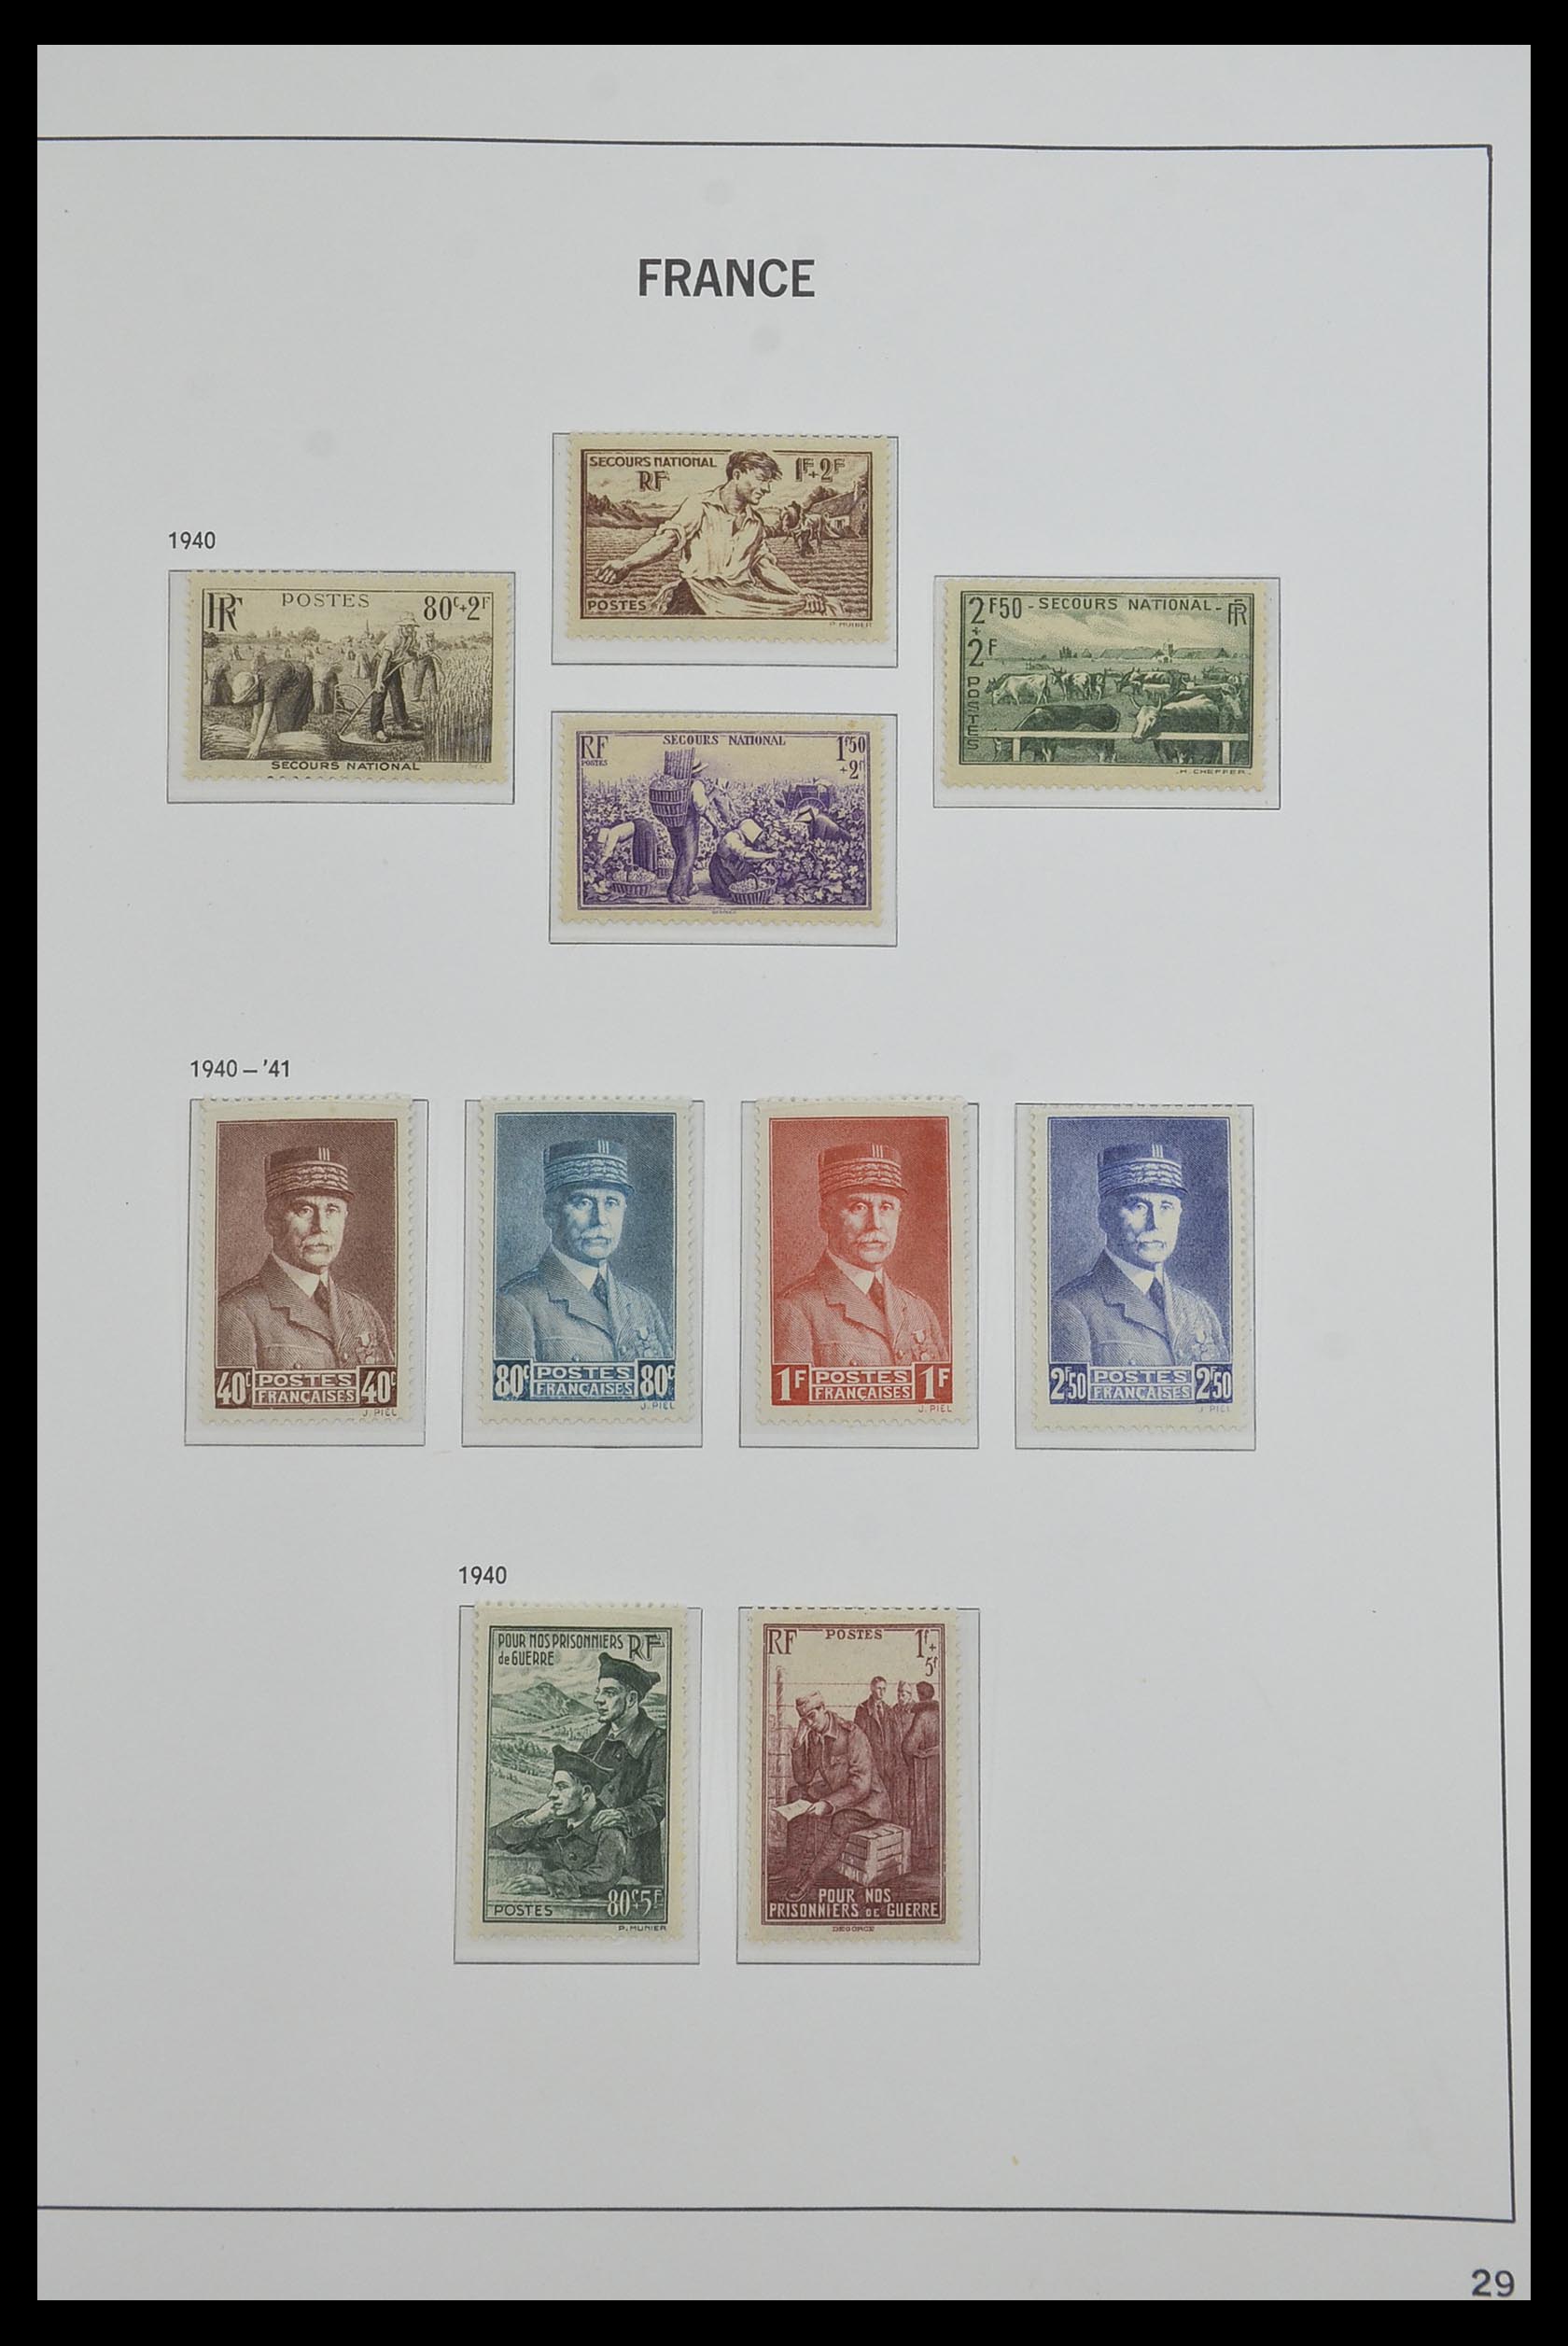 33480 029 - Stamp collection 33480 France 1849-1993.